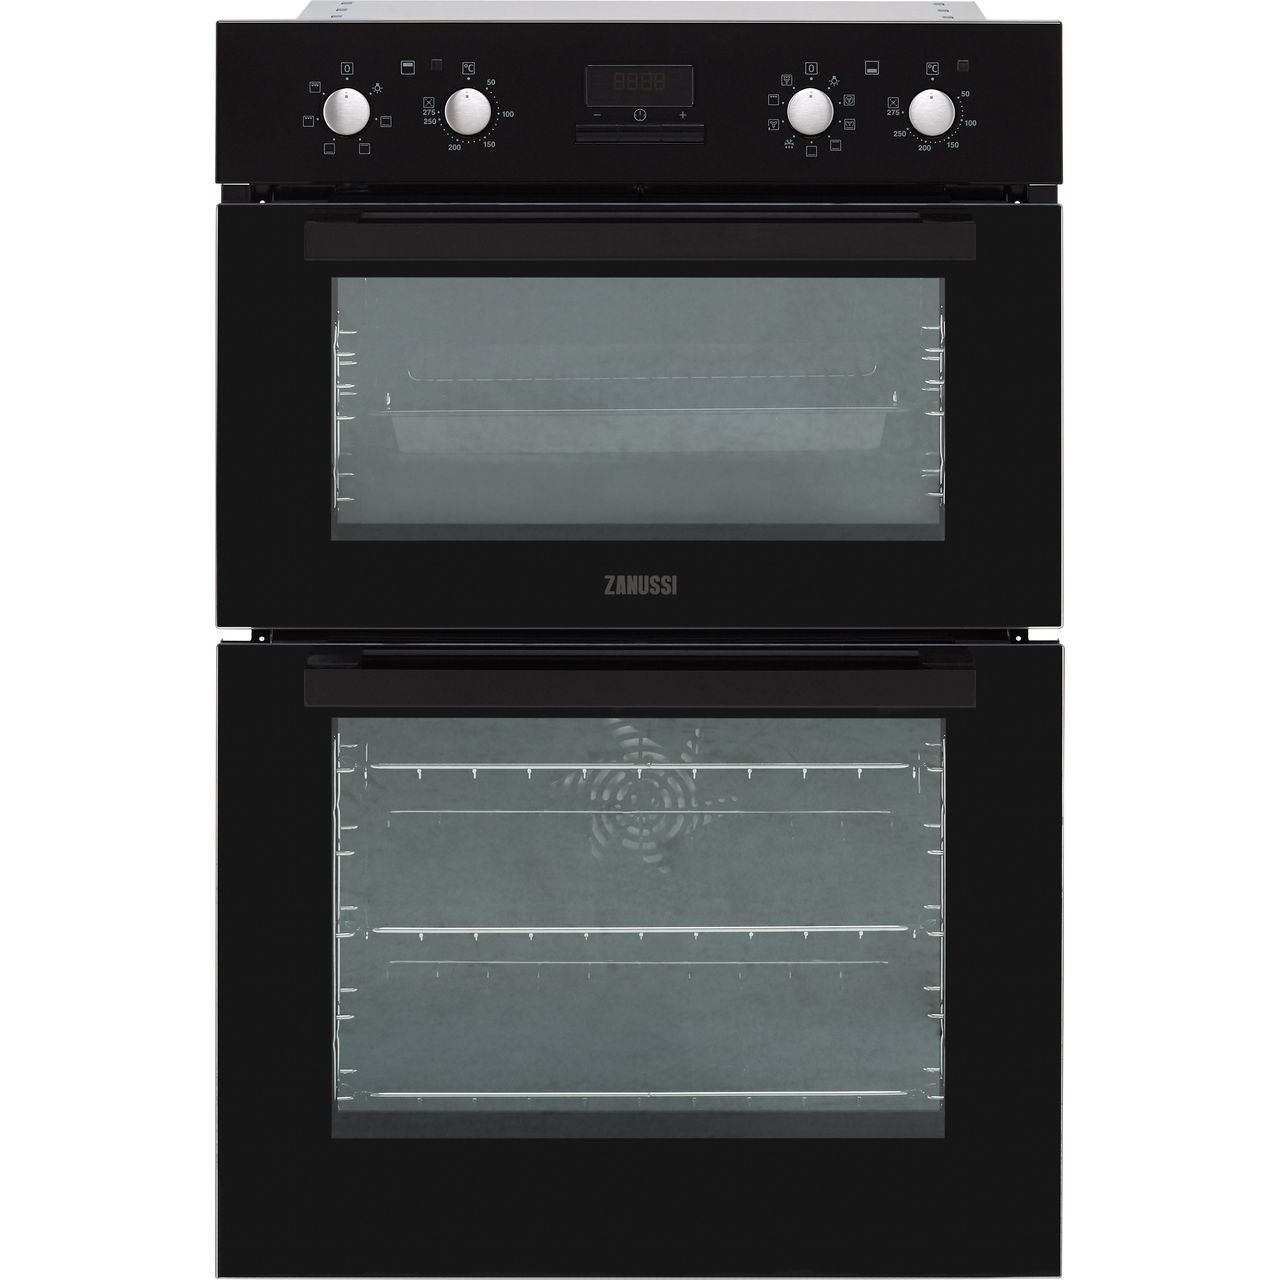 Zanussi ZOD35802BK Built In Double Oven Review